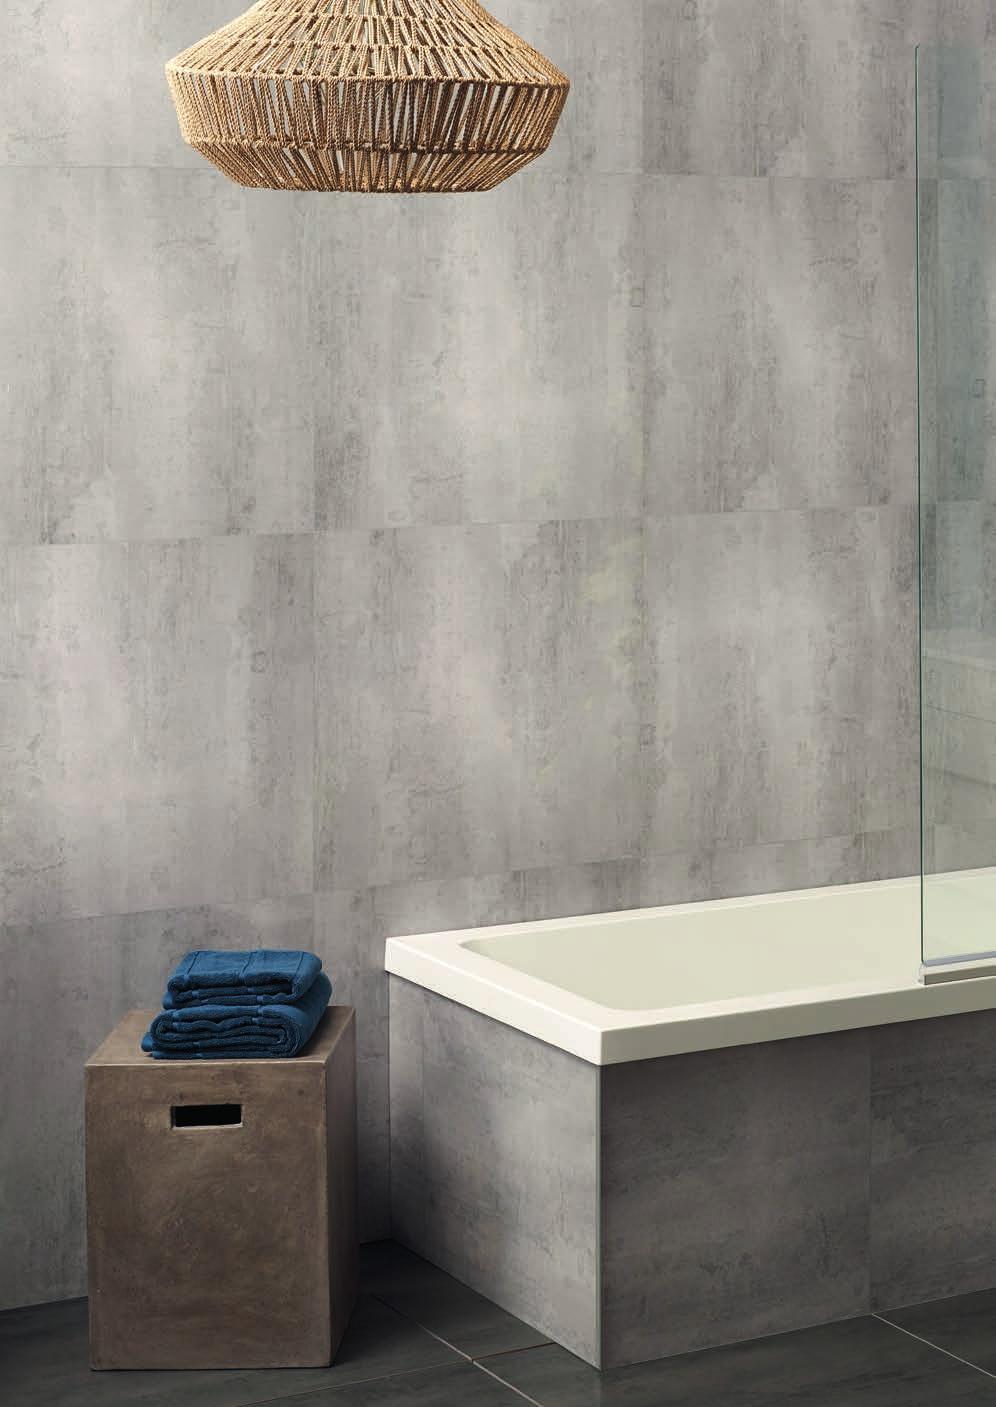 BATHS & SPA BATHS Clearlite offers an array of sizes and styles of baths to transform any bathroom into a relaxing sanctuary.